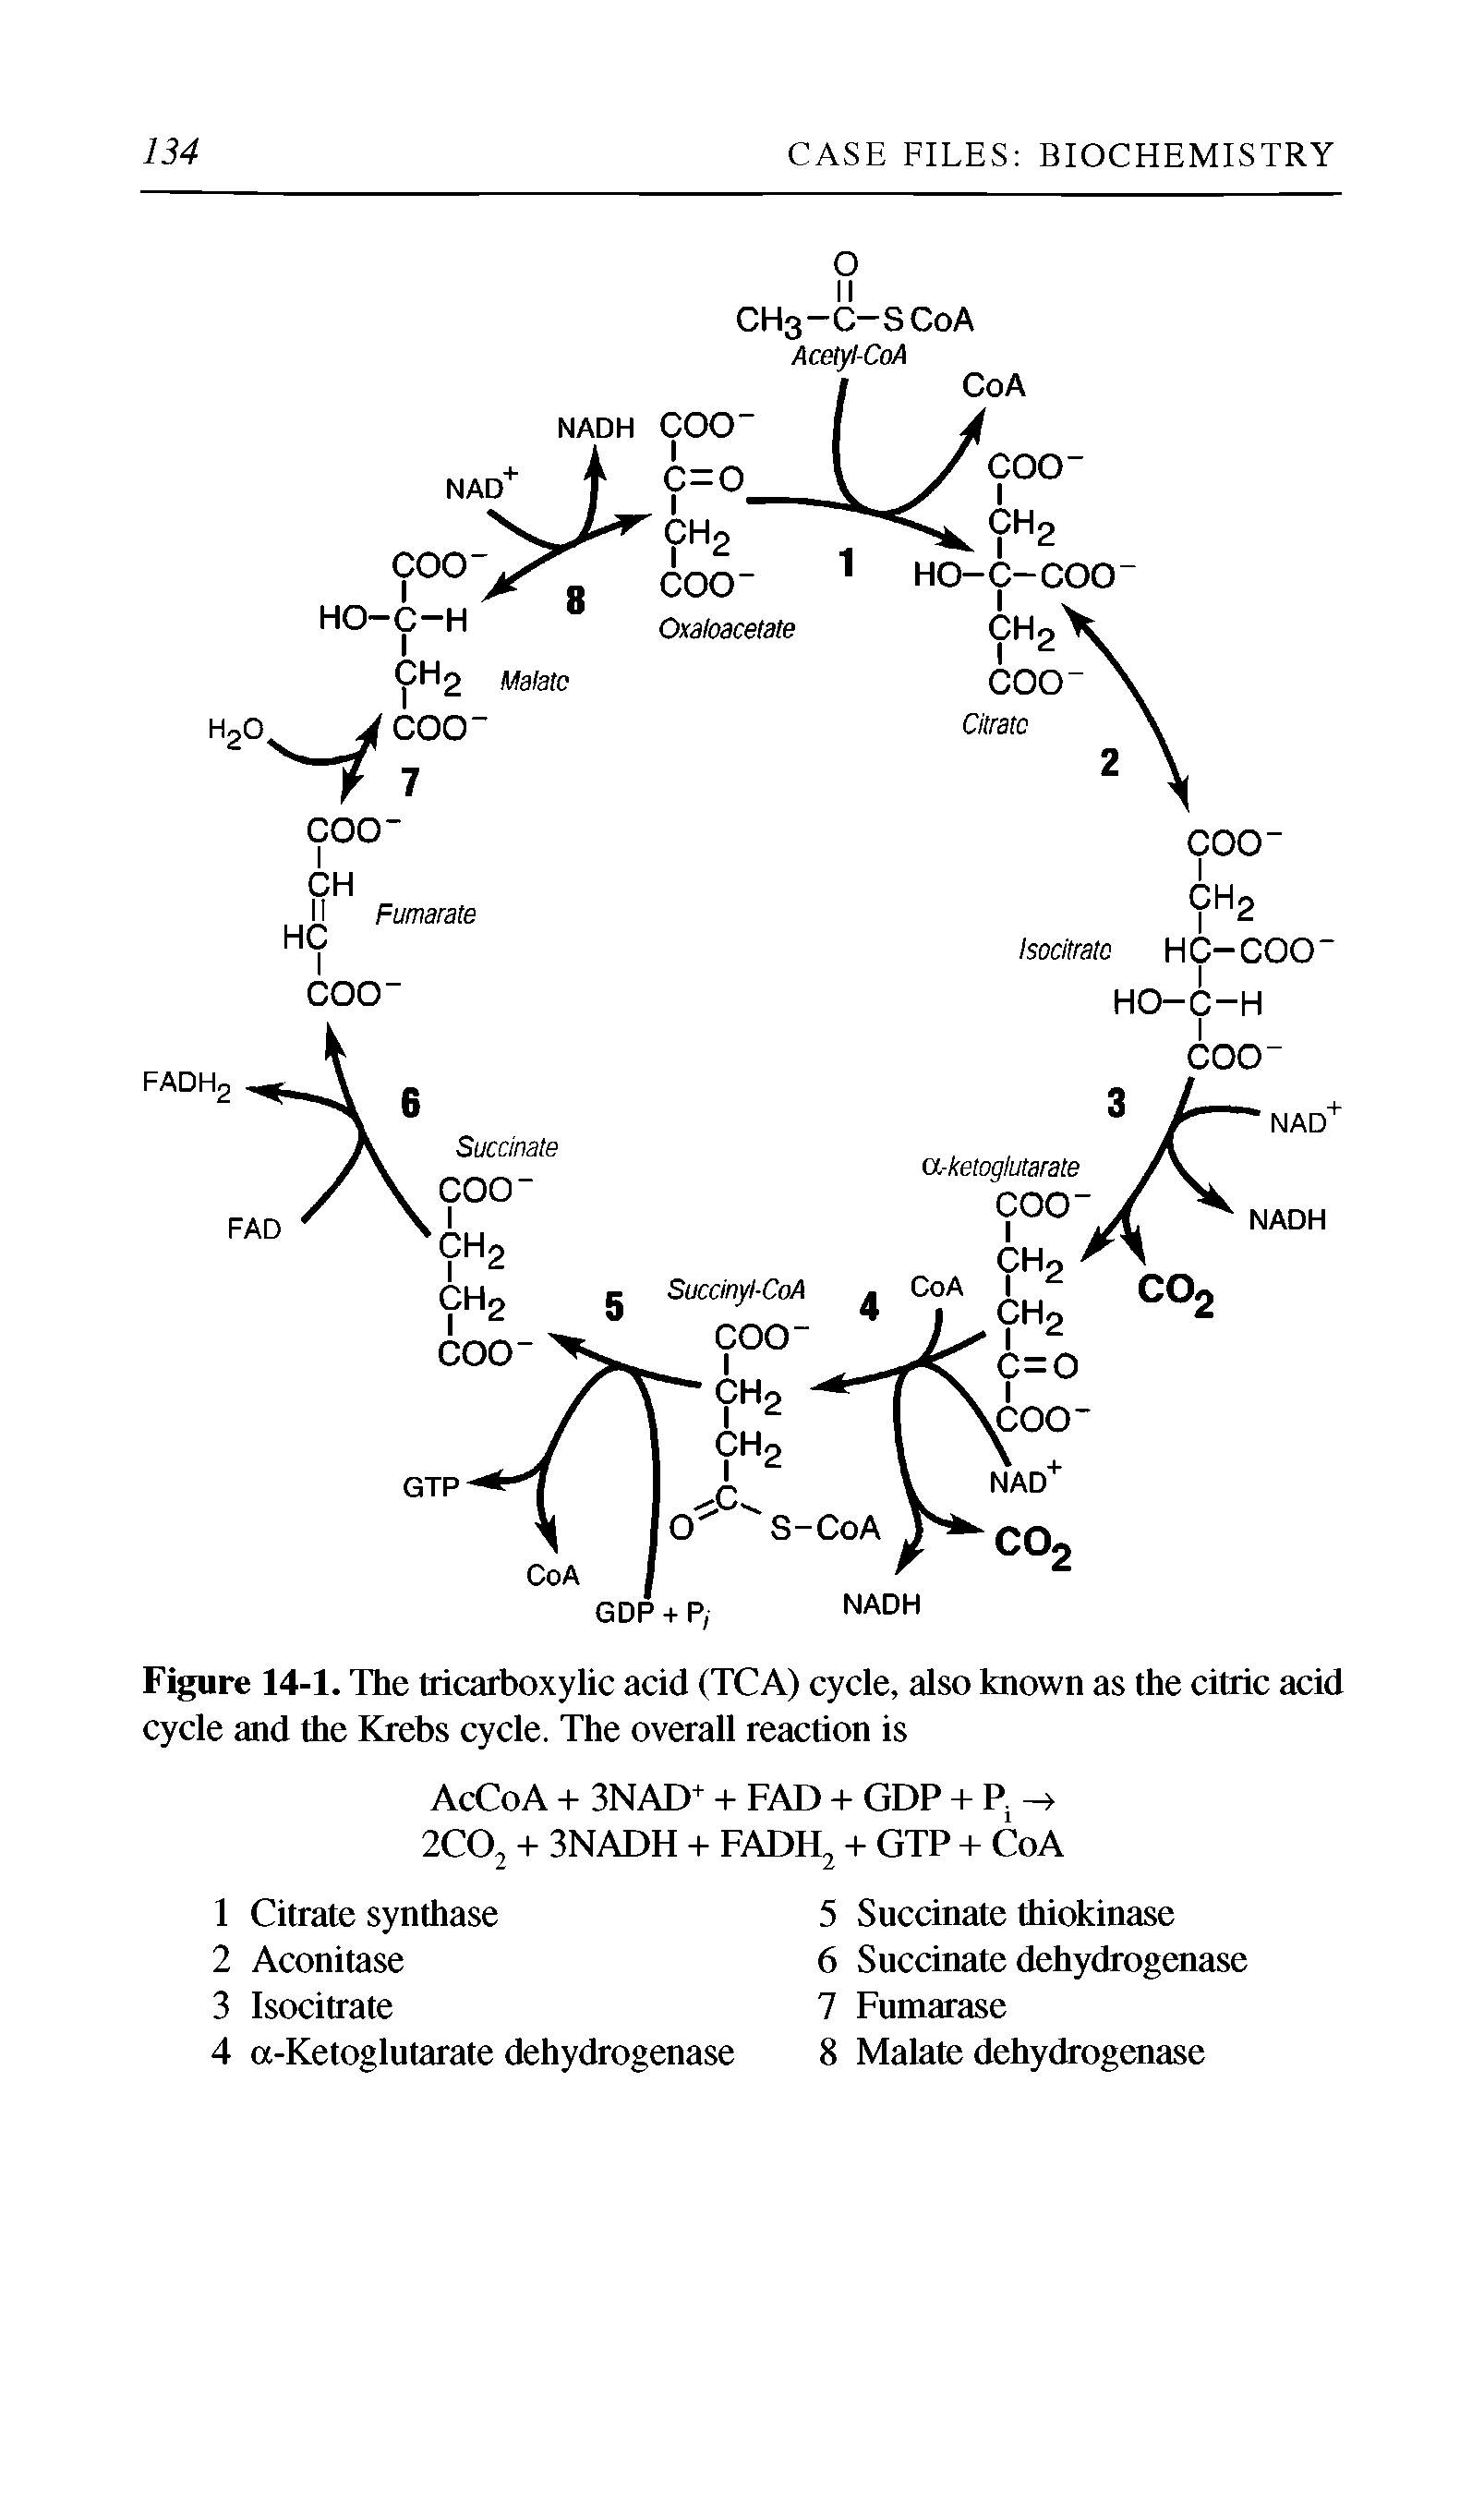 Figure 14-1. The tricarboxylic acid (TCA) cycle, also known as the citric acid cycle and the Krebs cycle. The overall reaction is...